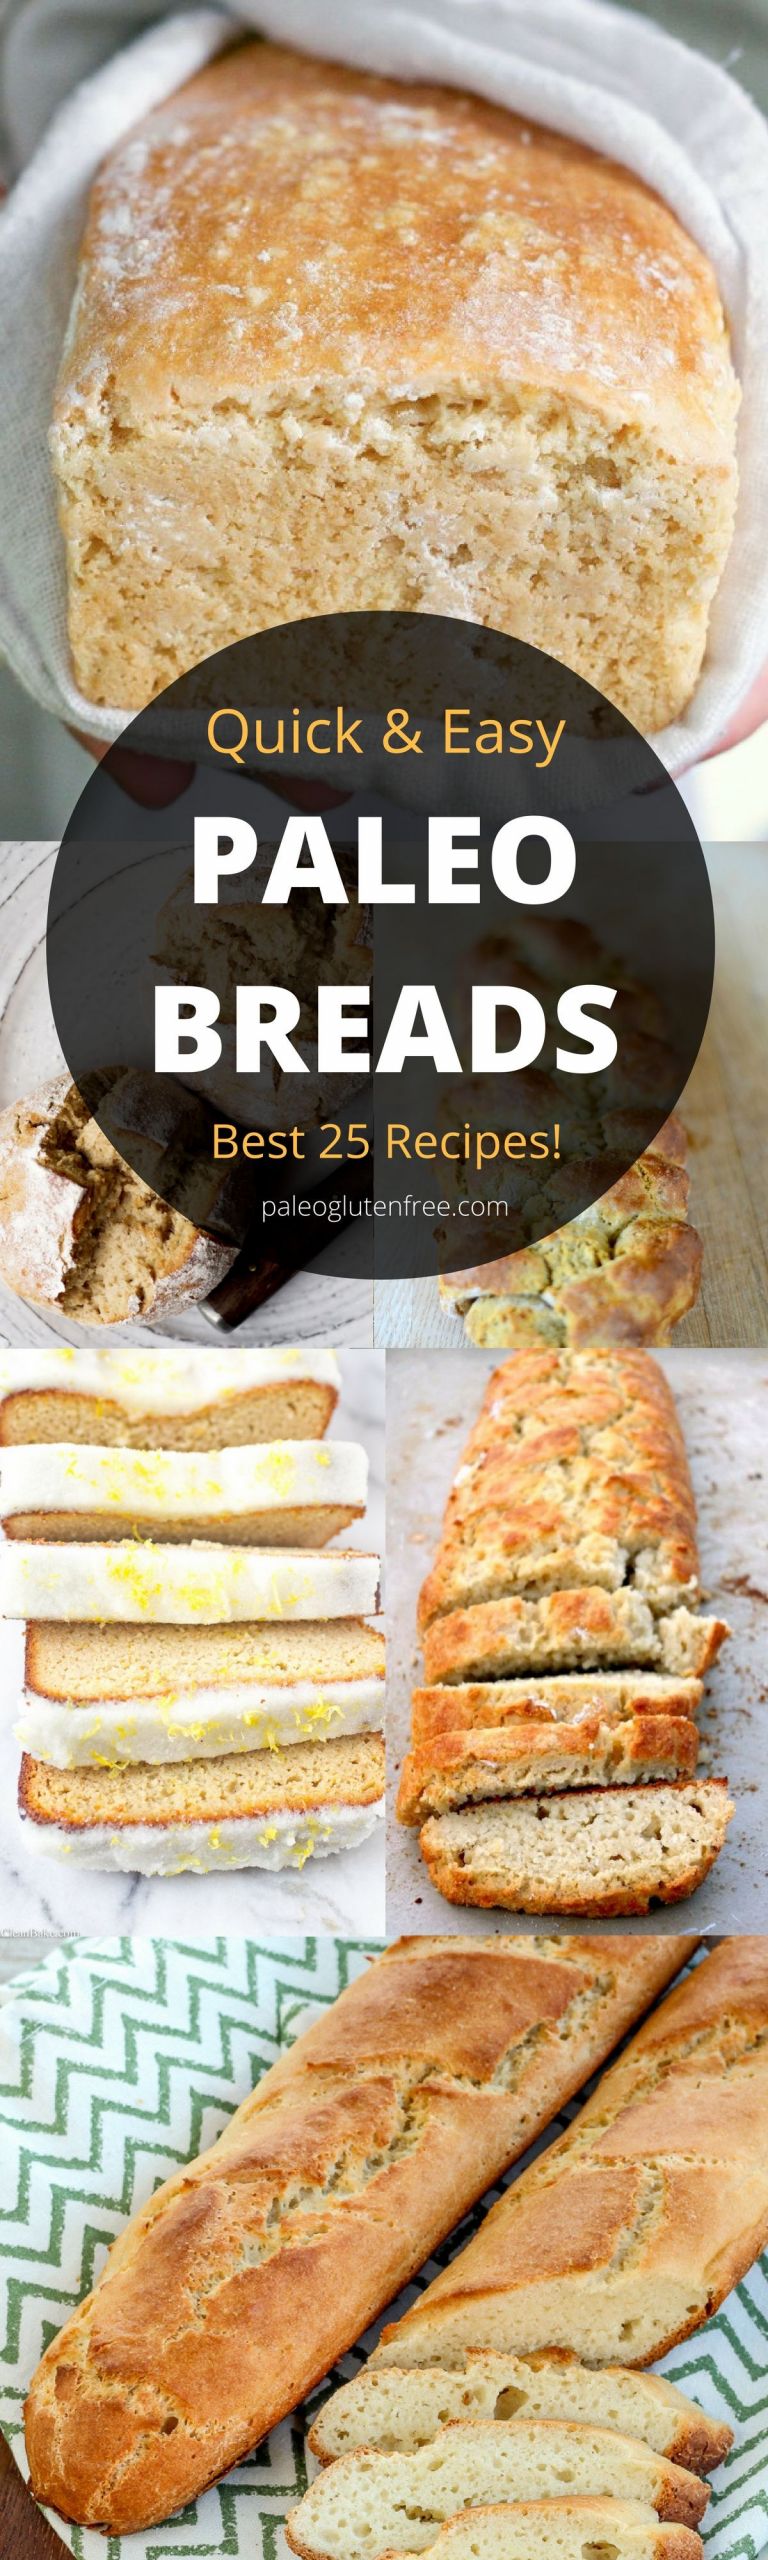 Best Paleo Bread Recipe
 The best most delicious PALEO Bread recipes Easy crusty